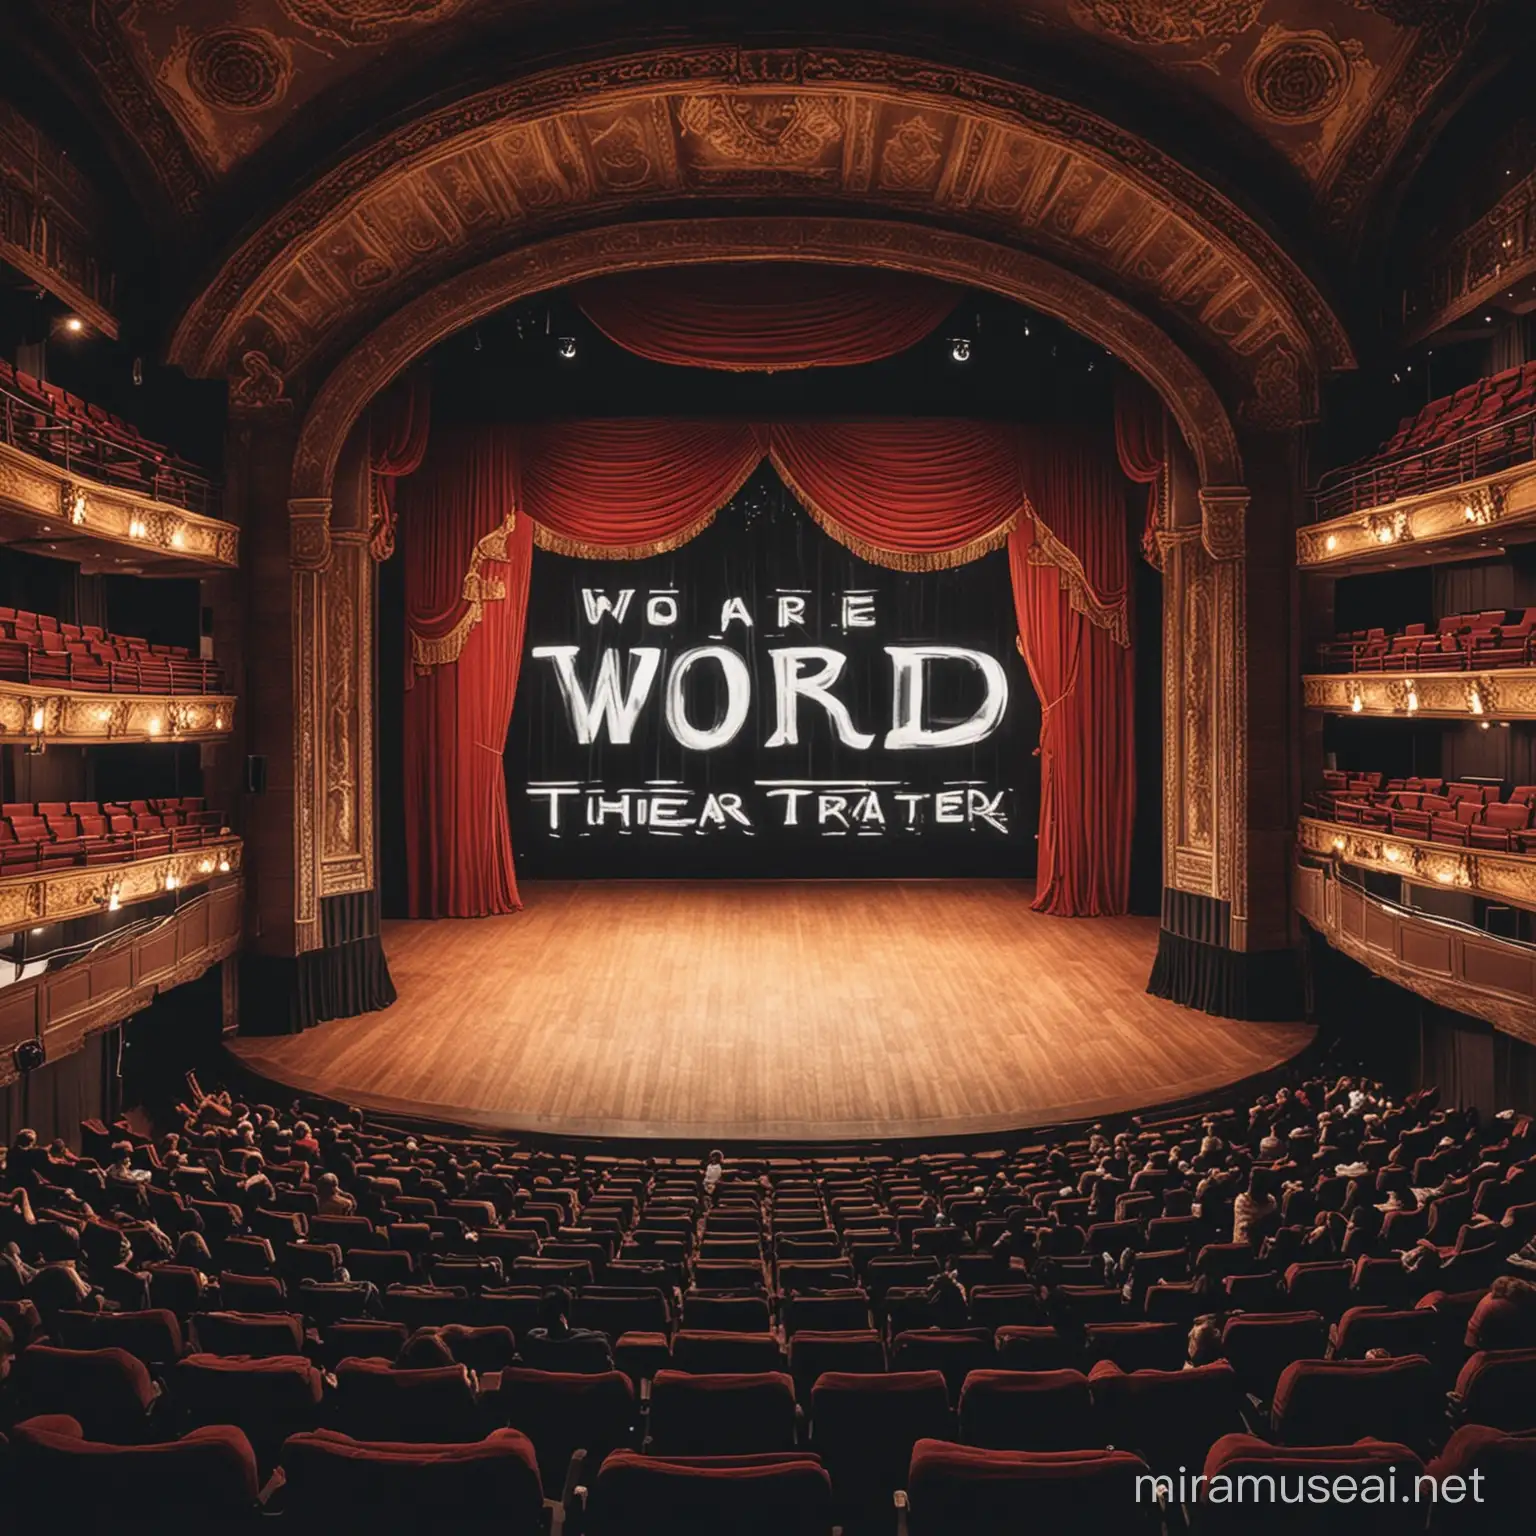 Prepare world theater day image with no people